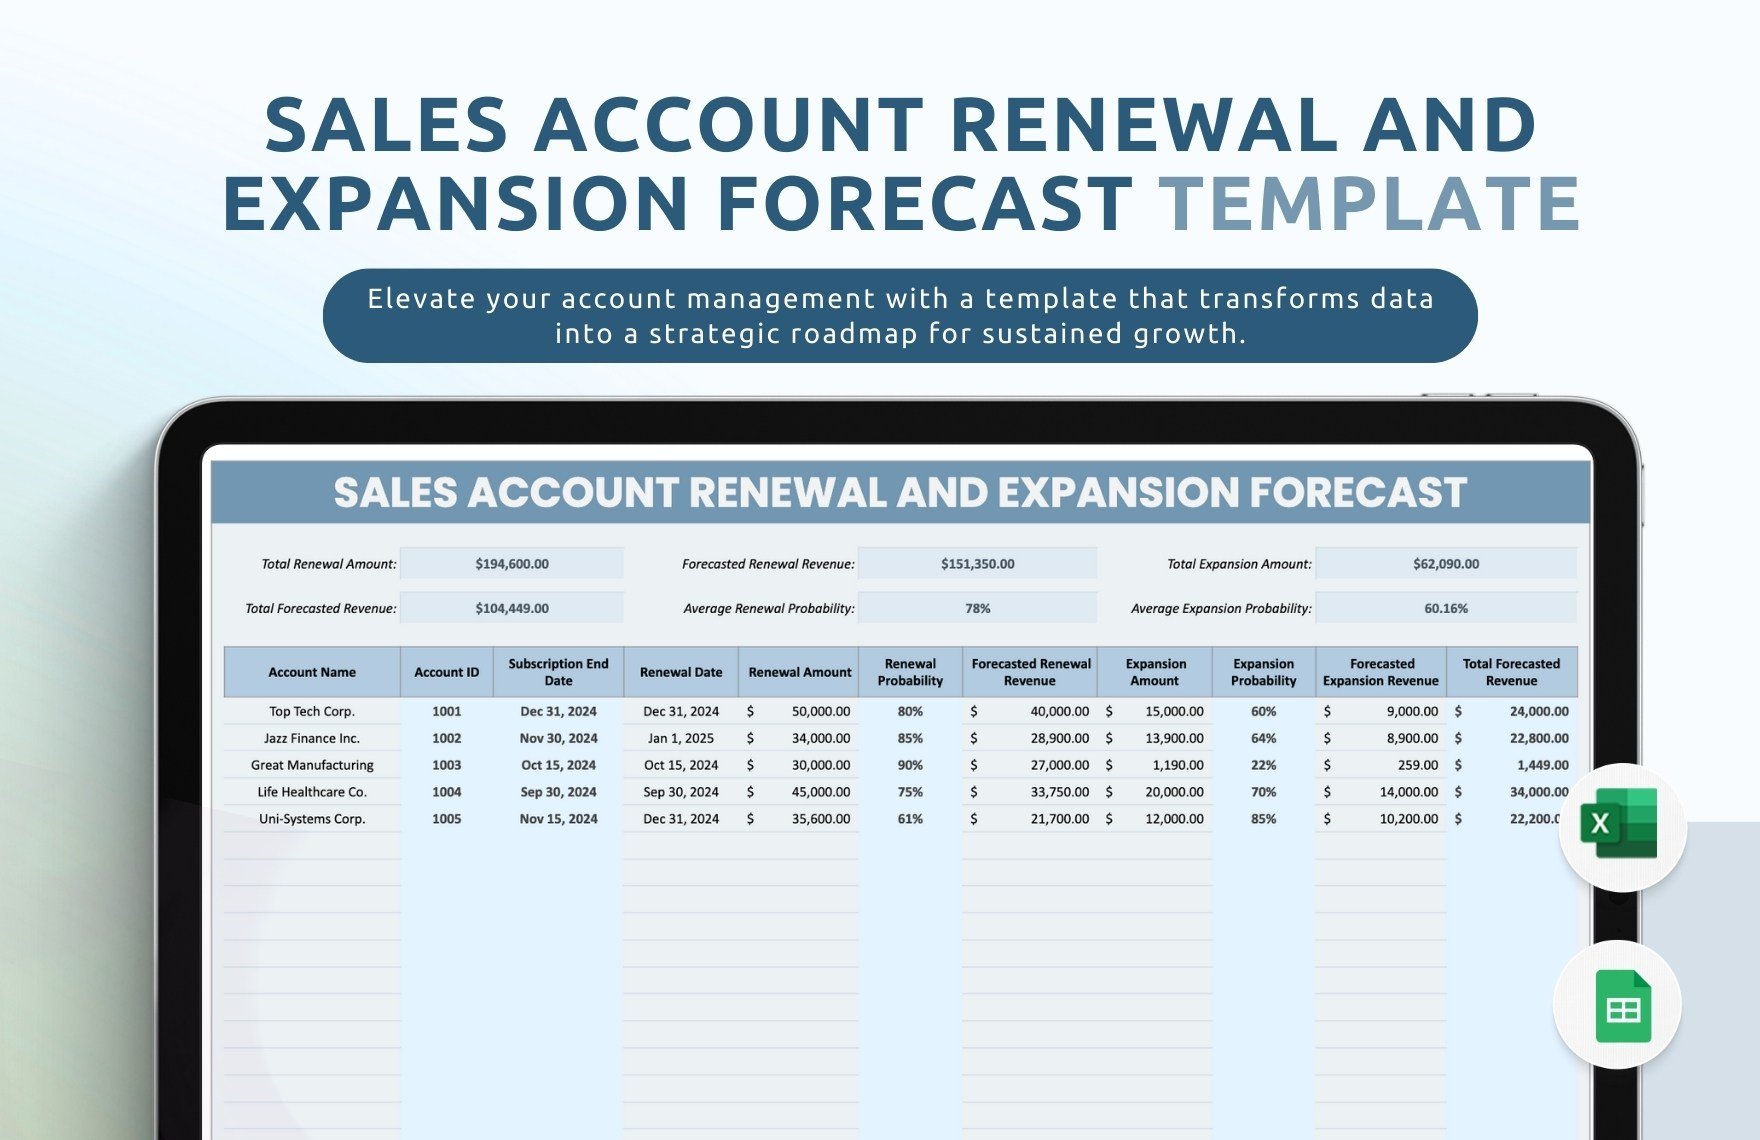 Sales Account Renewal and Expansion Forecast Template